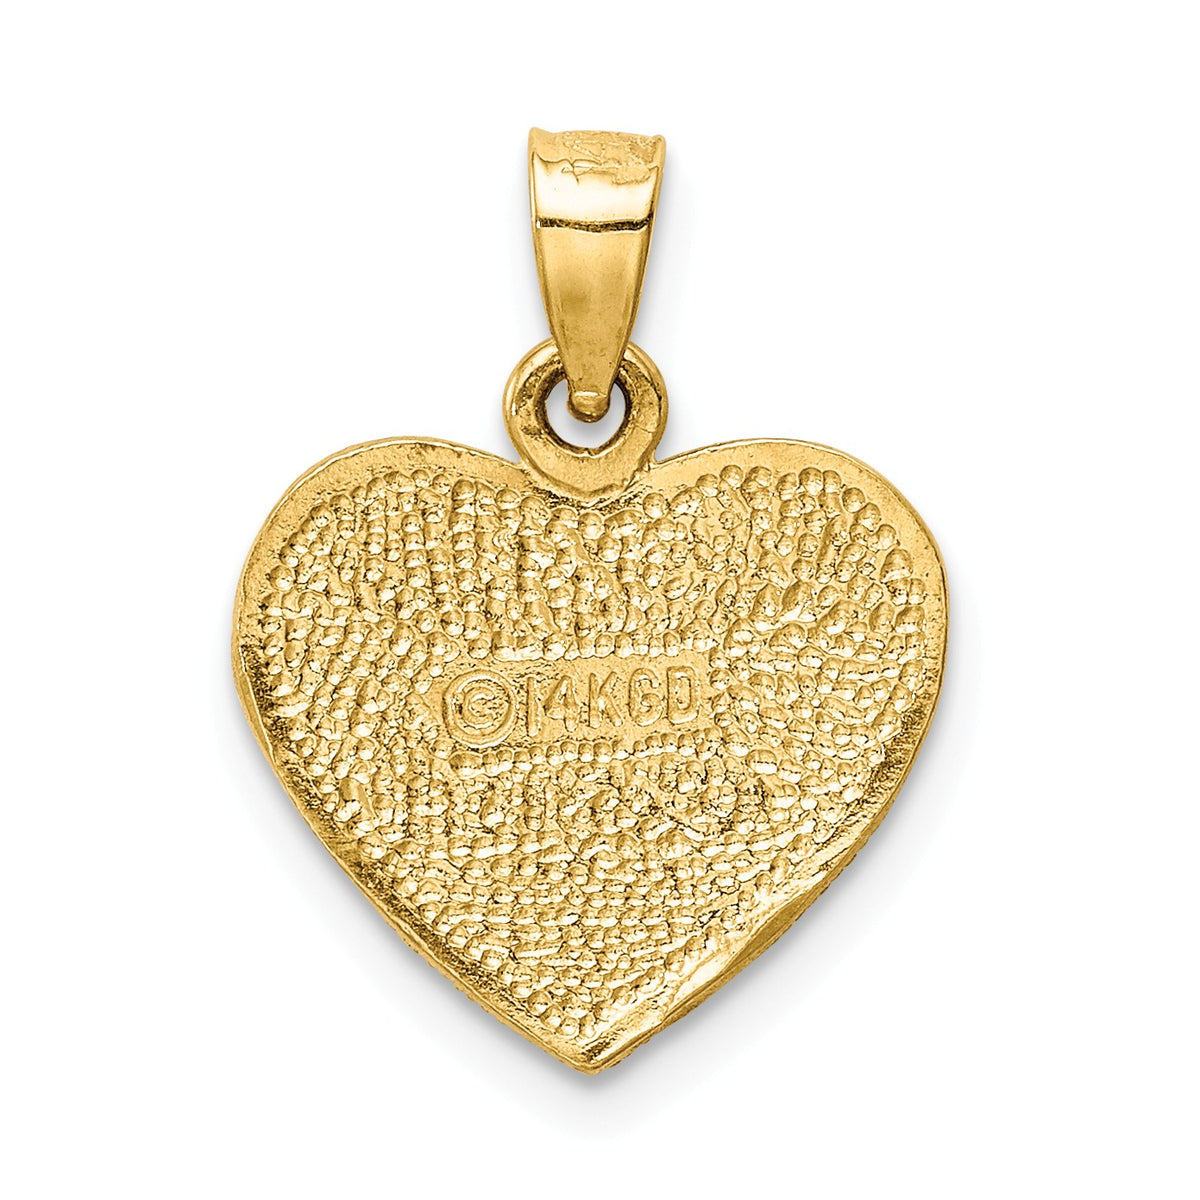 Alternate view of the 14k Yellow Gold I Love You Heart Charm or Pendant, 14mm by The Black Bow Jewelry Co.